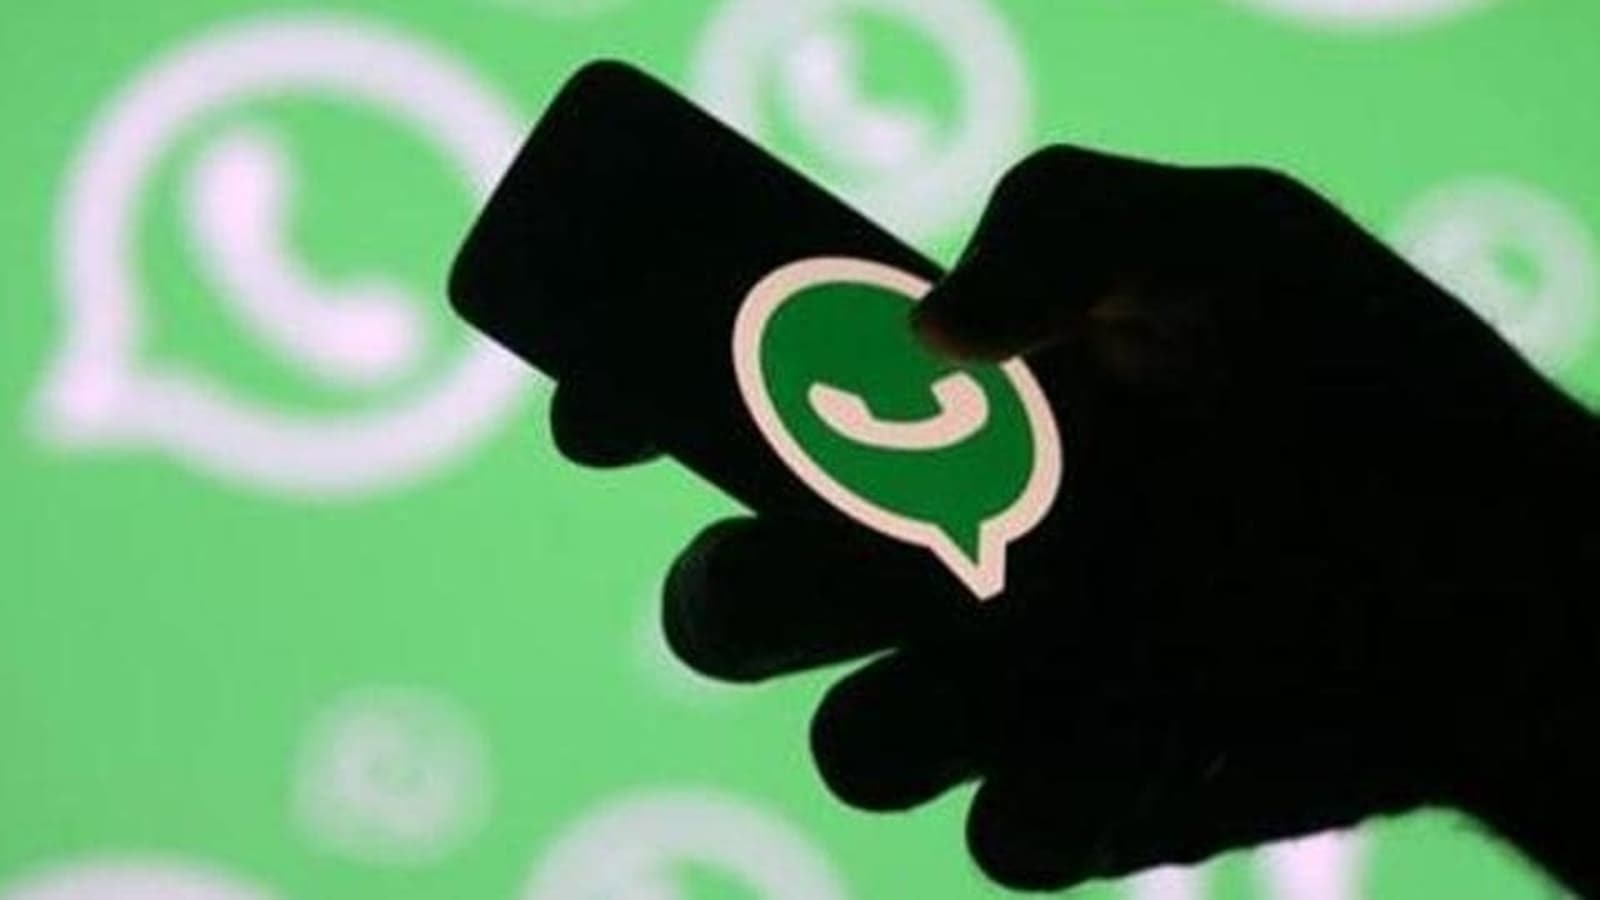 WhatsApp's new features include mute option for group calls. Check details